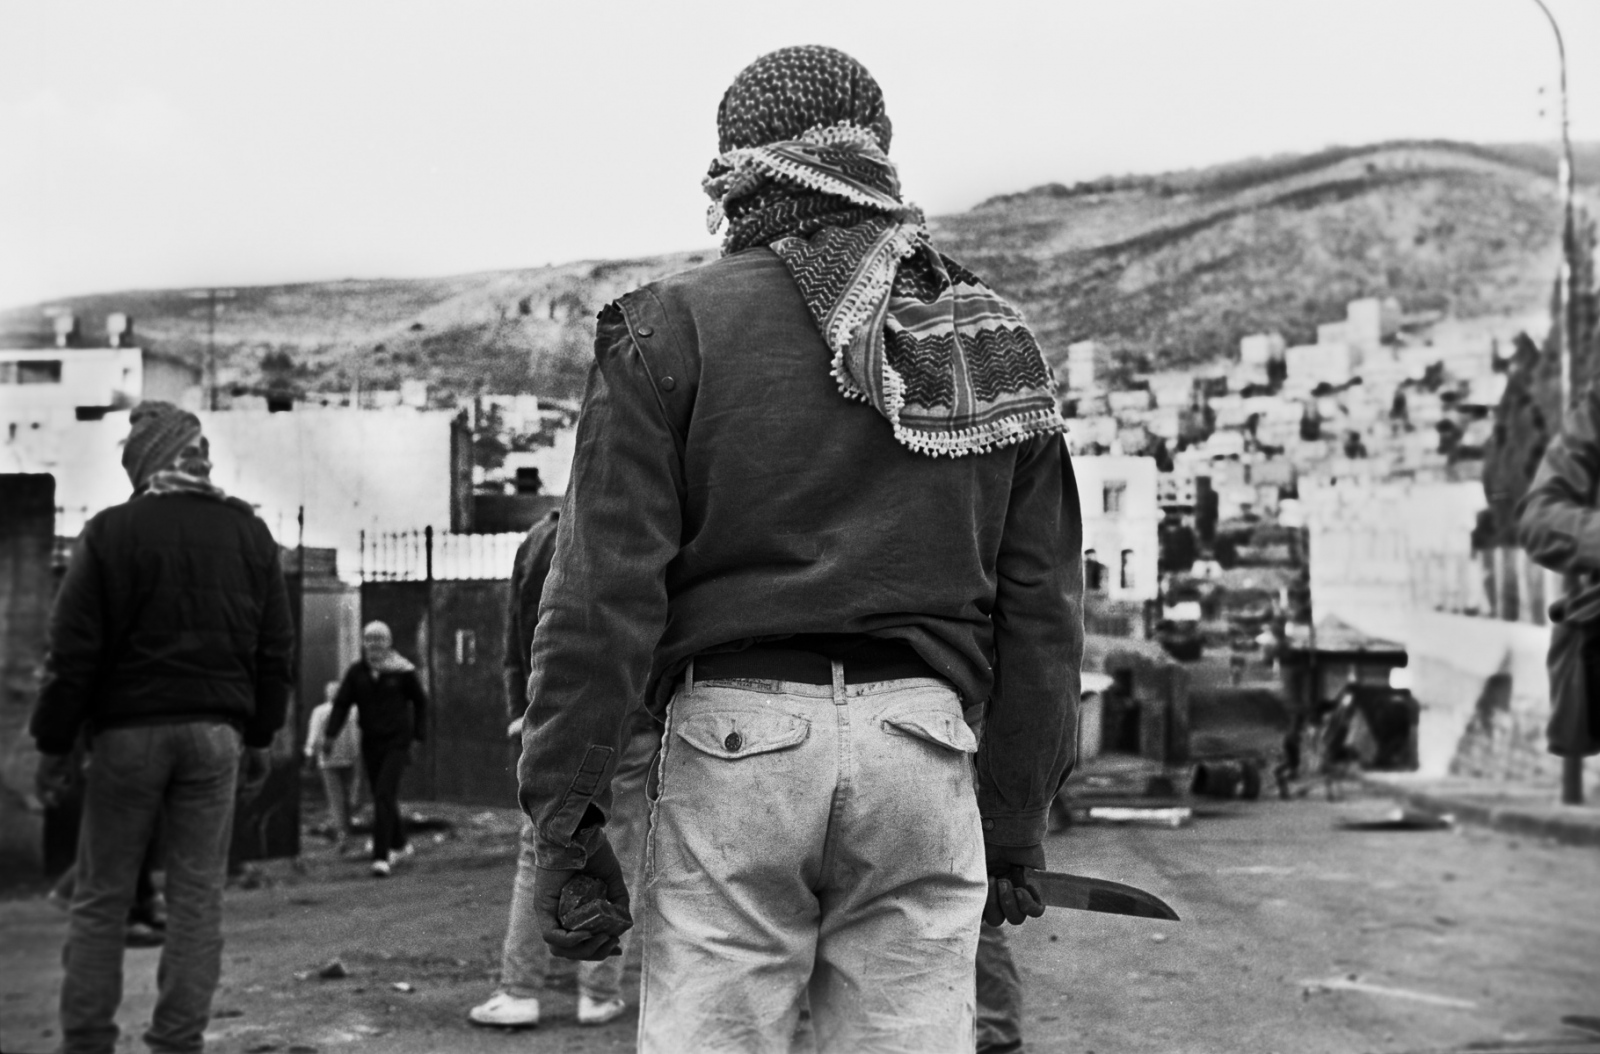 Forgotten Wars - With a knife and rocks in hand a Palestinian youth stands...